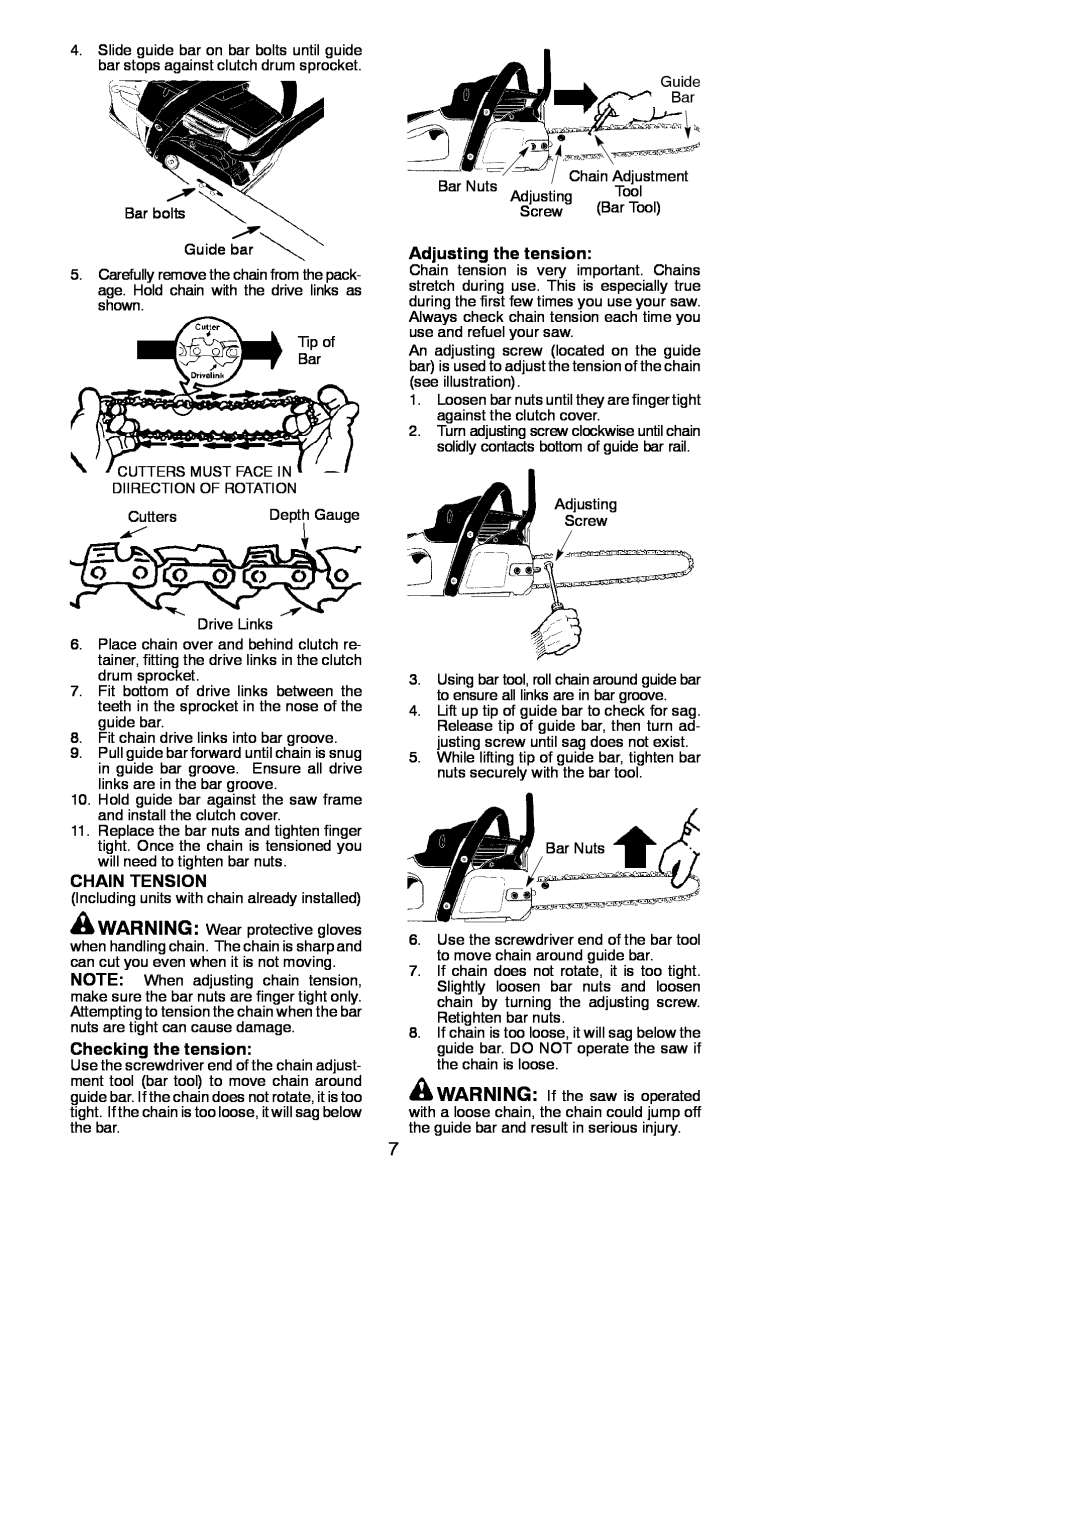 Poulan 545137251 instruction manual Chain Tension, Checking the tension, Adjusting the tension 